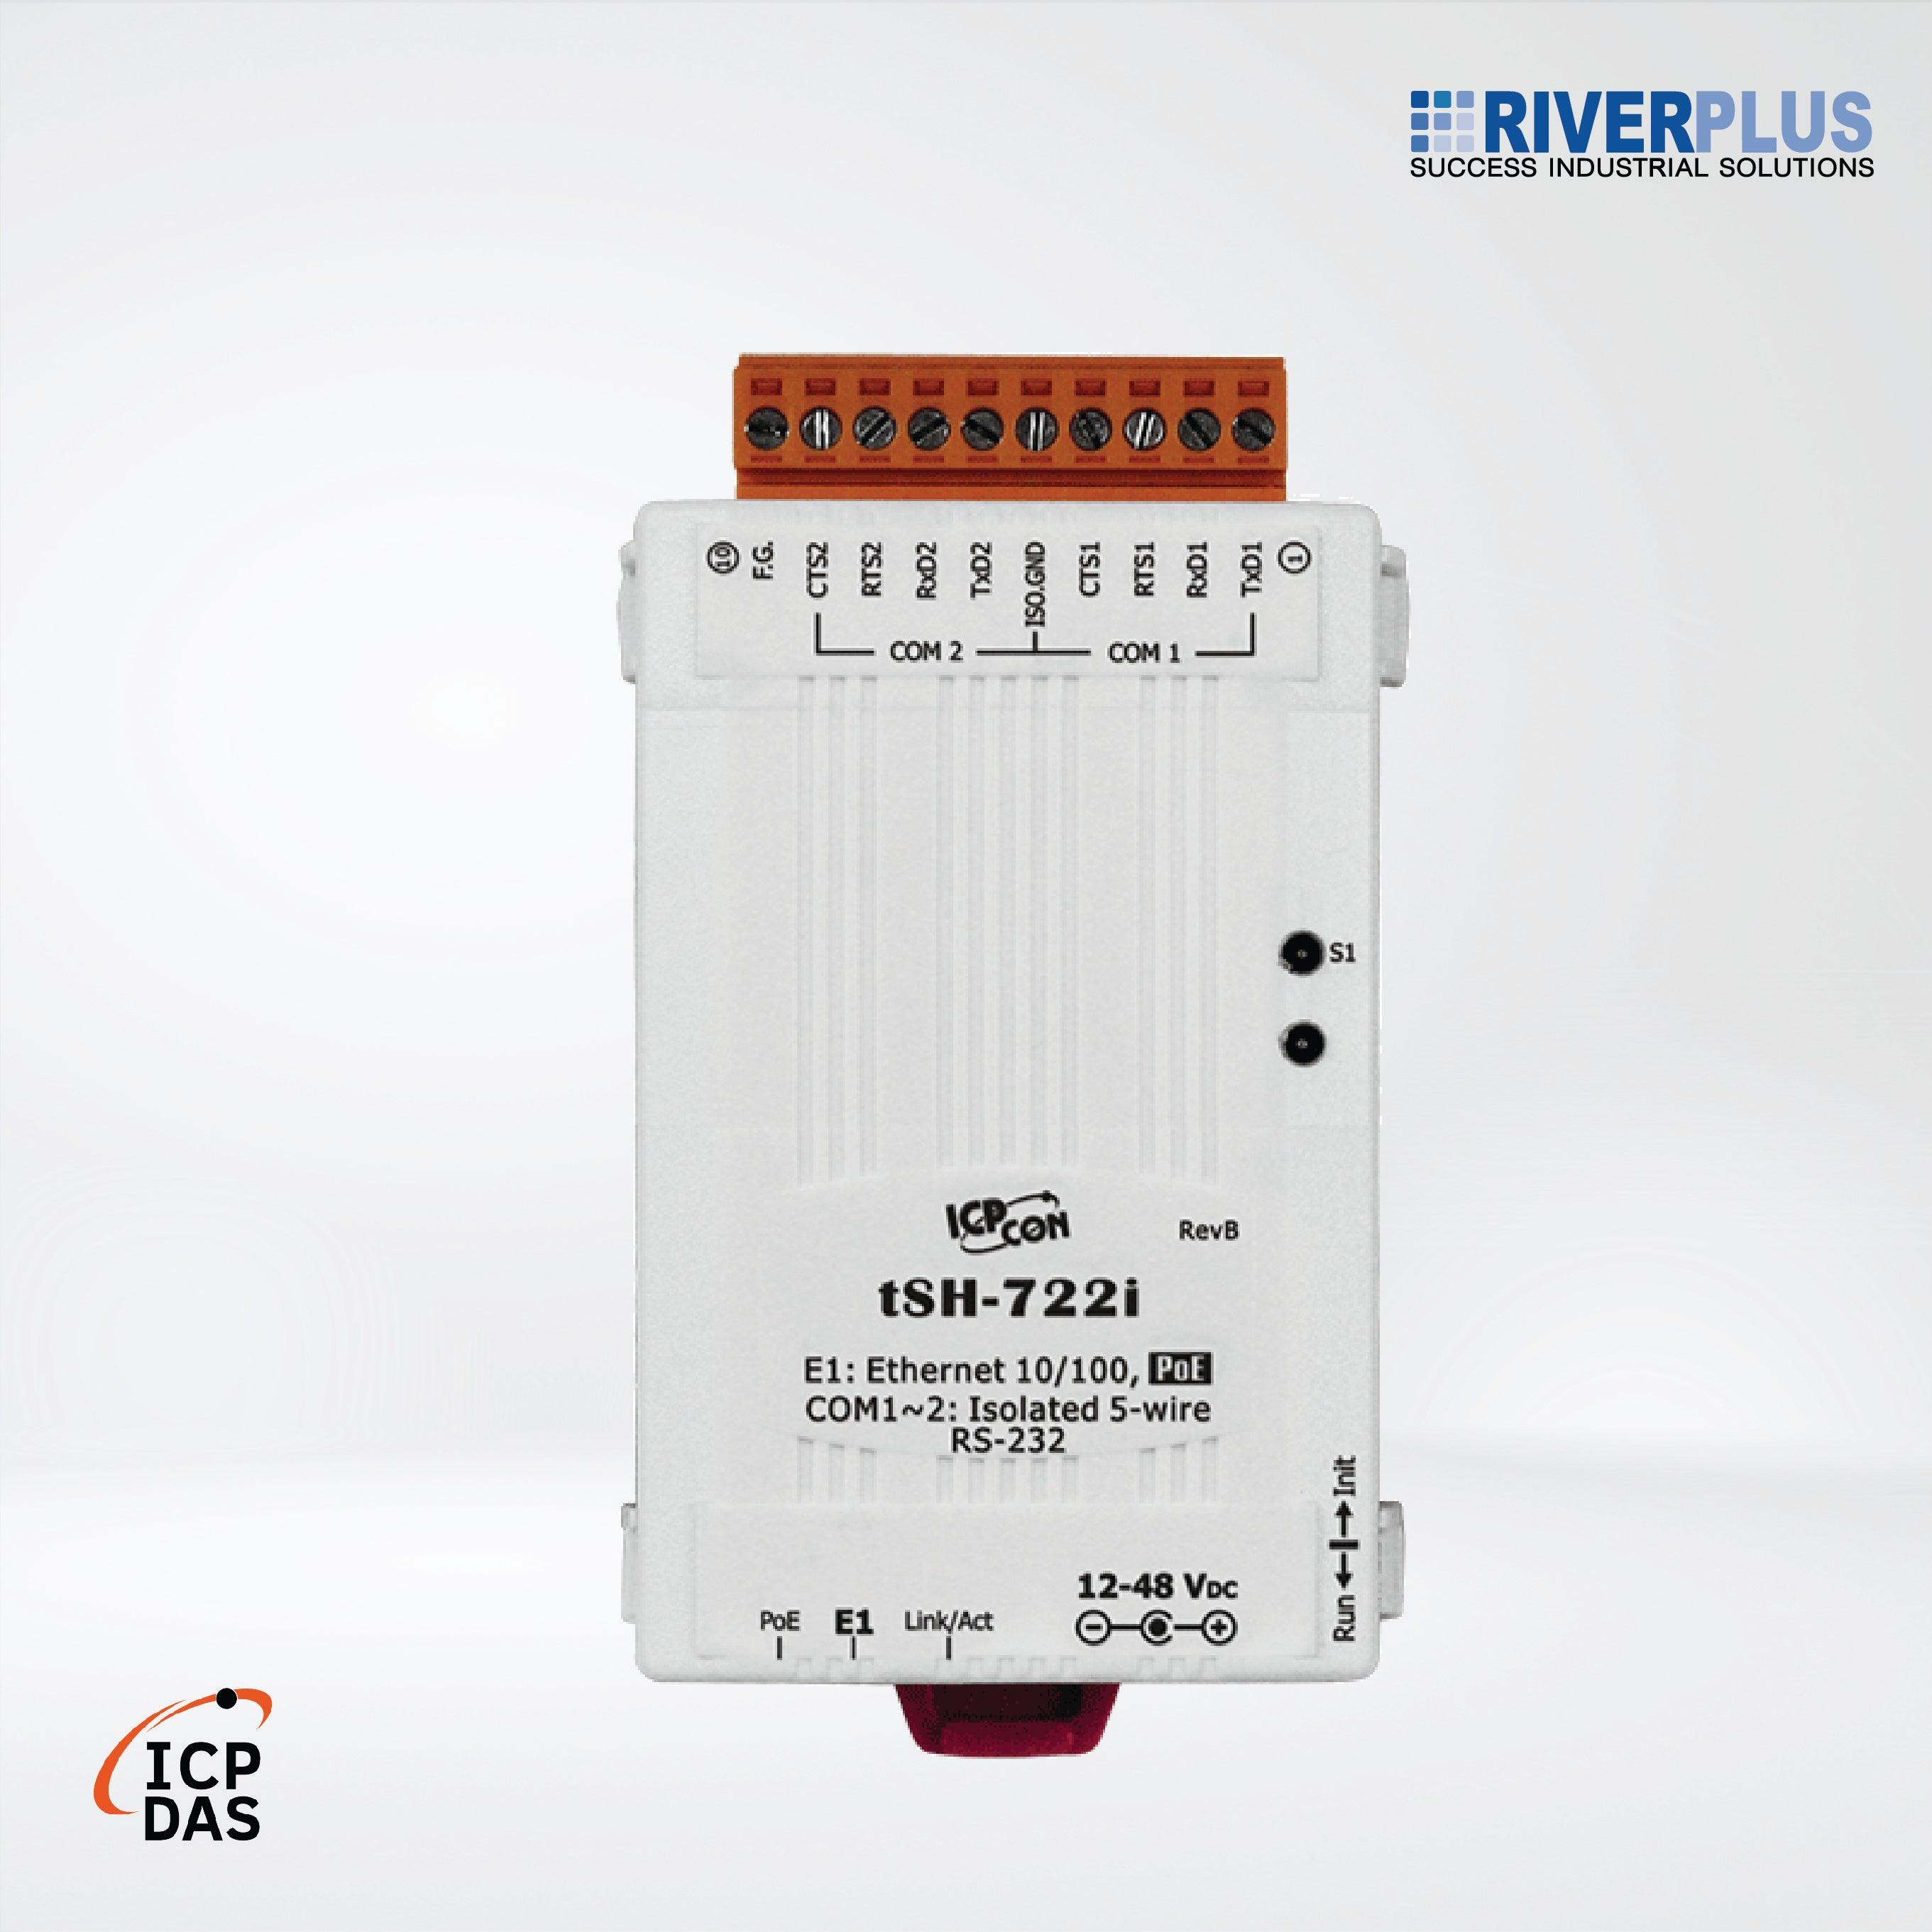 tSH-722i Tiny (2x RS-232) Serial Port Converter with PoE and Power Isolation - Riverplus